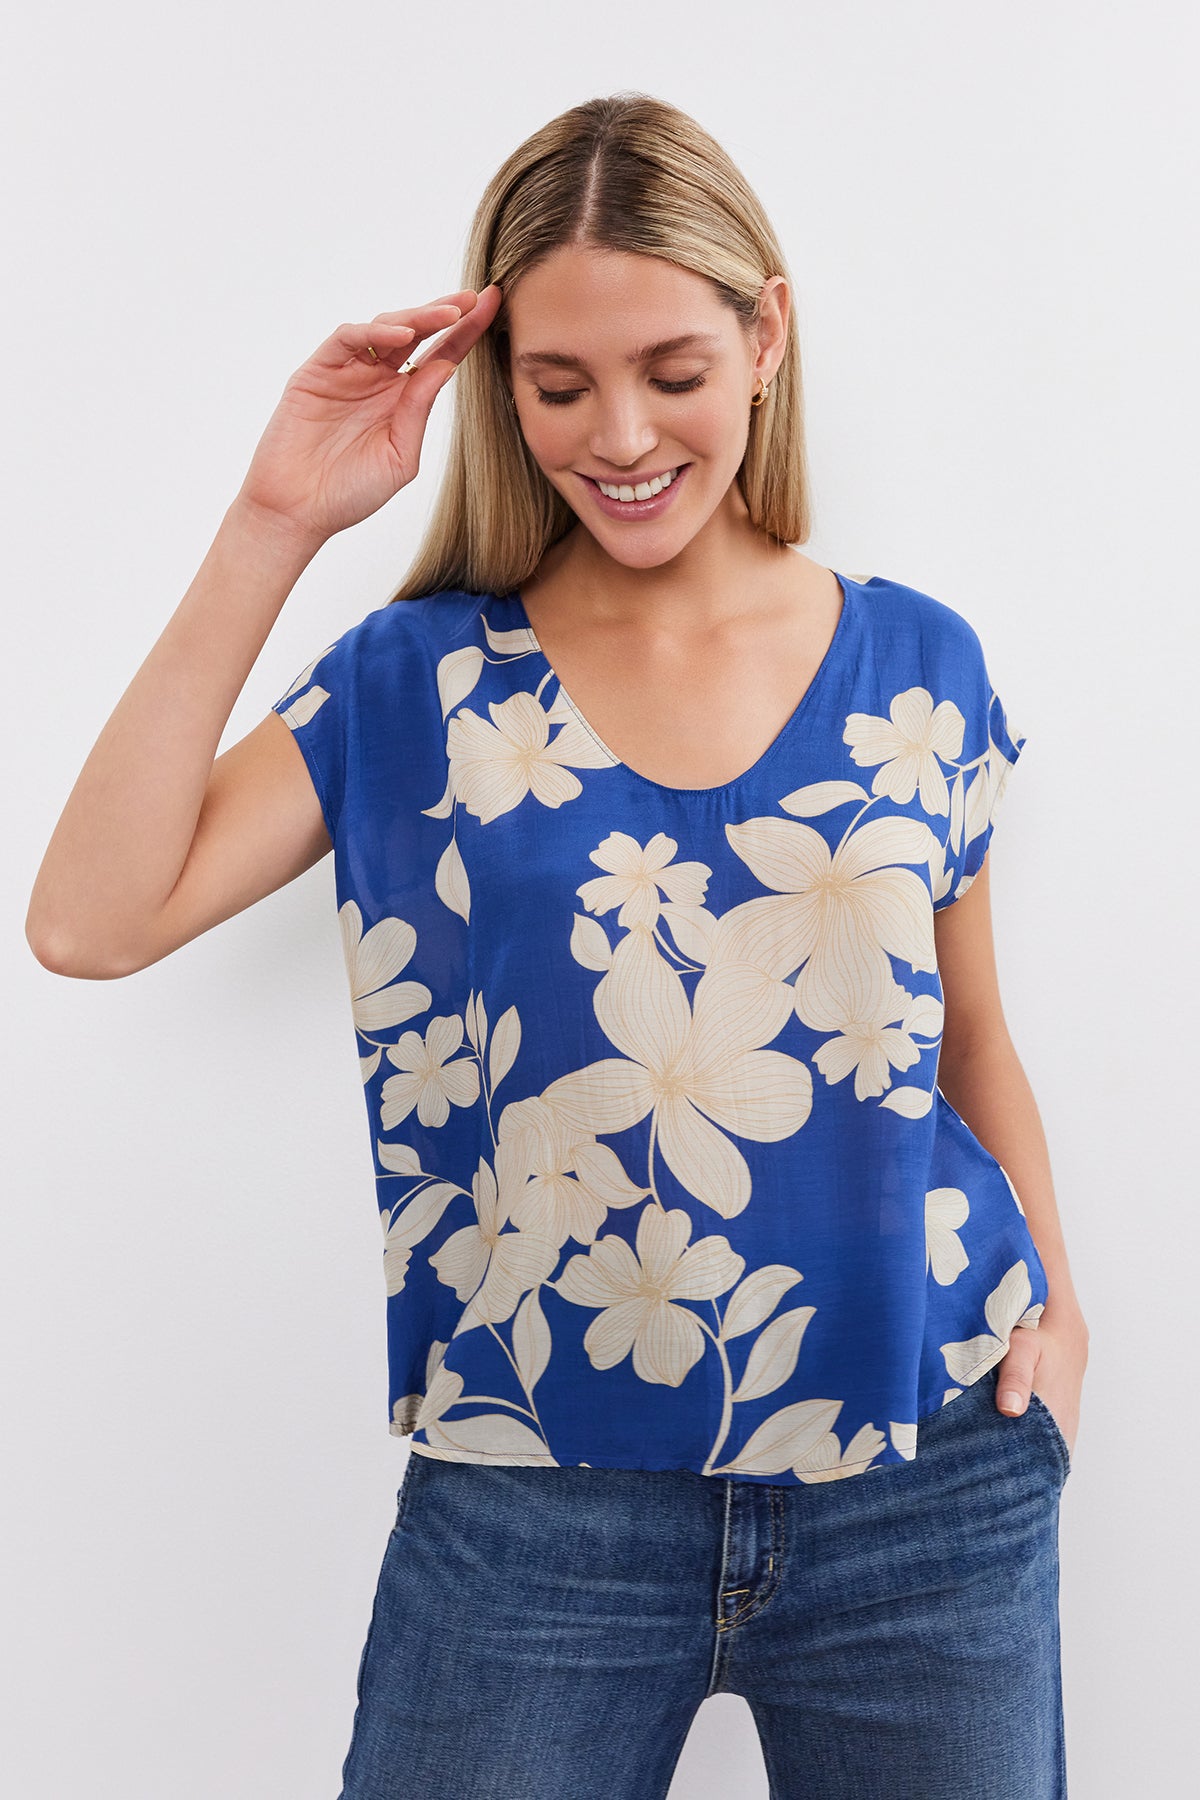 A woman wearing a blue SHAYLEN PRINTED SCOOP NECK top by Velvet by Graham & Spencer and jeans.-35655290486977